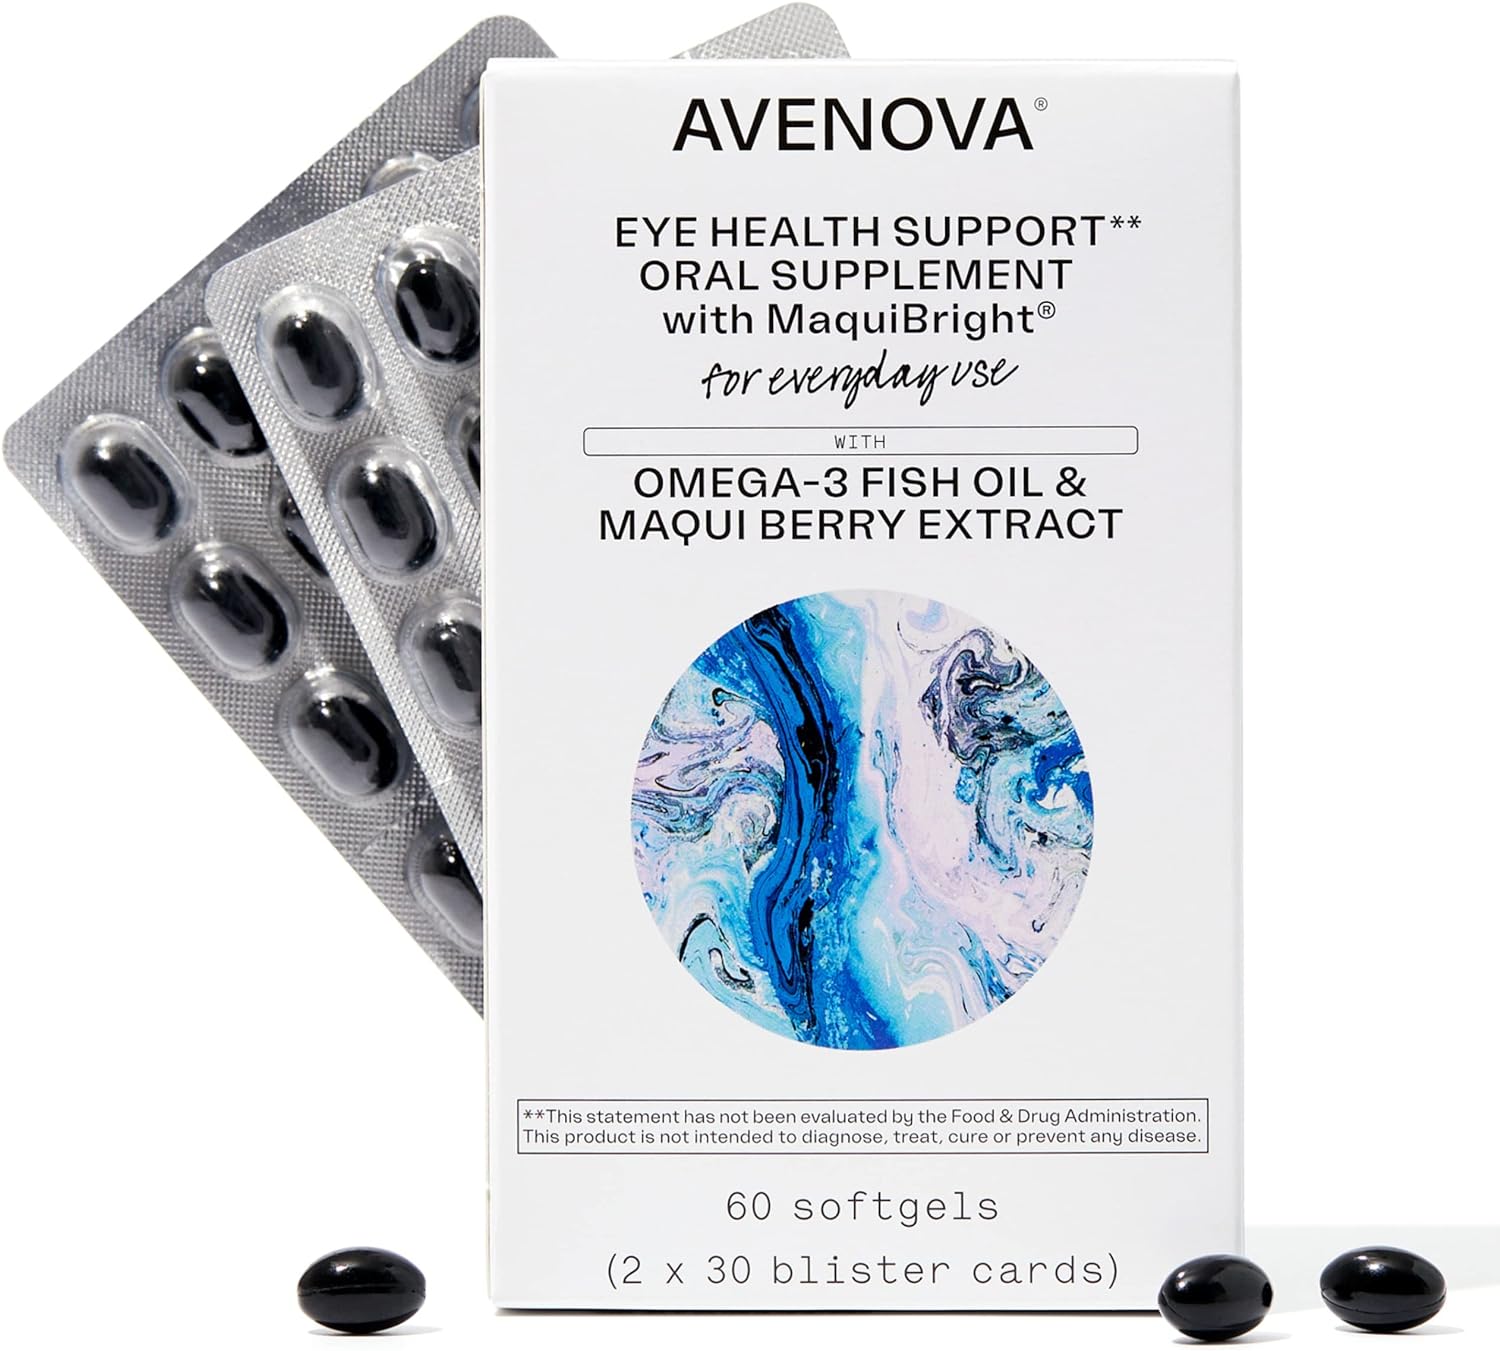 Avenova Eye Health Support Oral Supplement with MaquiBright? - Antioxidant-Rich Maqui Berry Extract and Omega-3 Triglyceride Fish Oil for Dry Eye Relief, Eye Strain and Vision Health, 60 Softgels